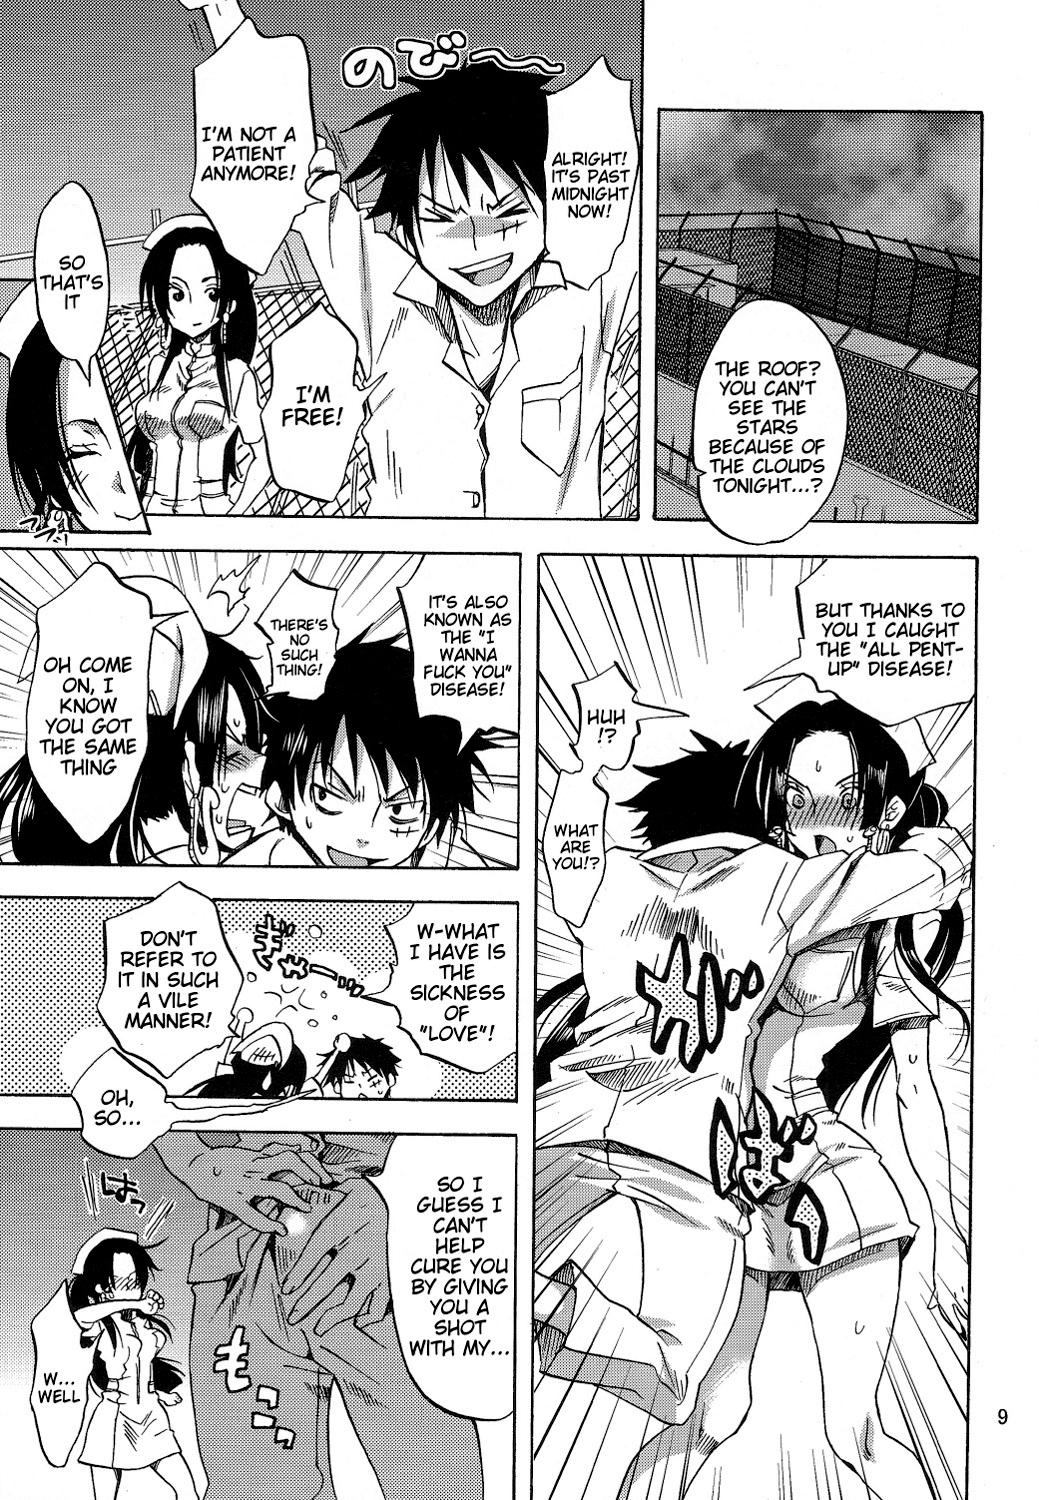 Toy Pirates Hospital - One piece Anal Creampie - Page 8